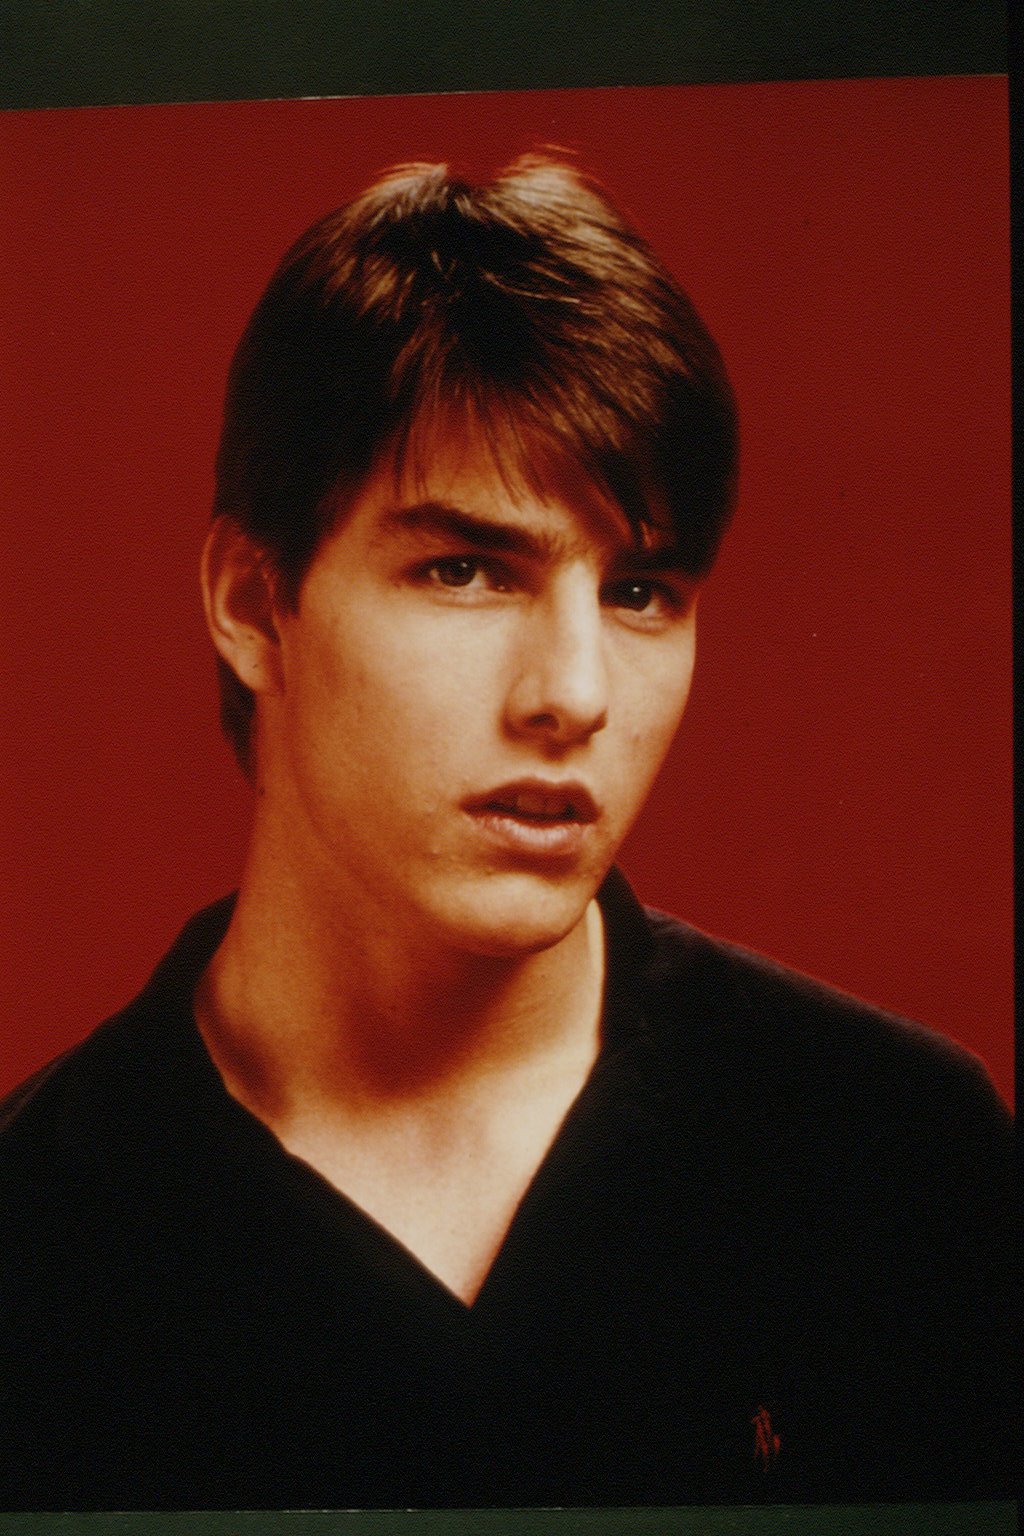 Tom Cruise pictured in 1990. | Source: Getty Images